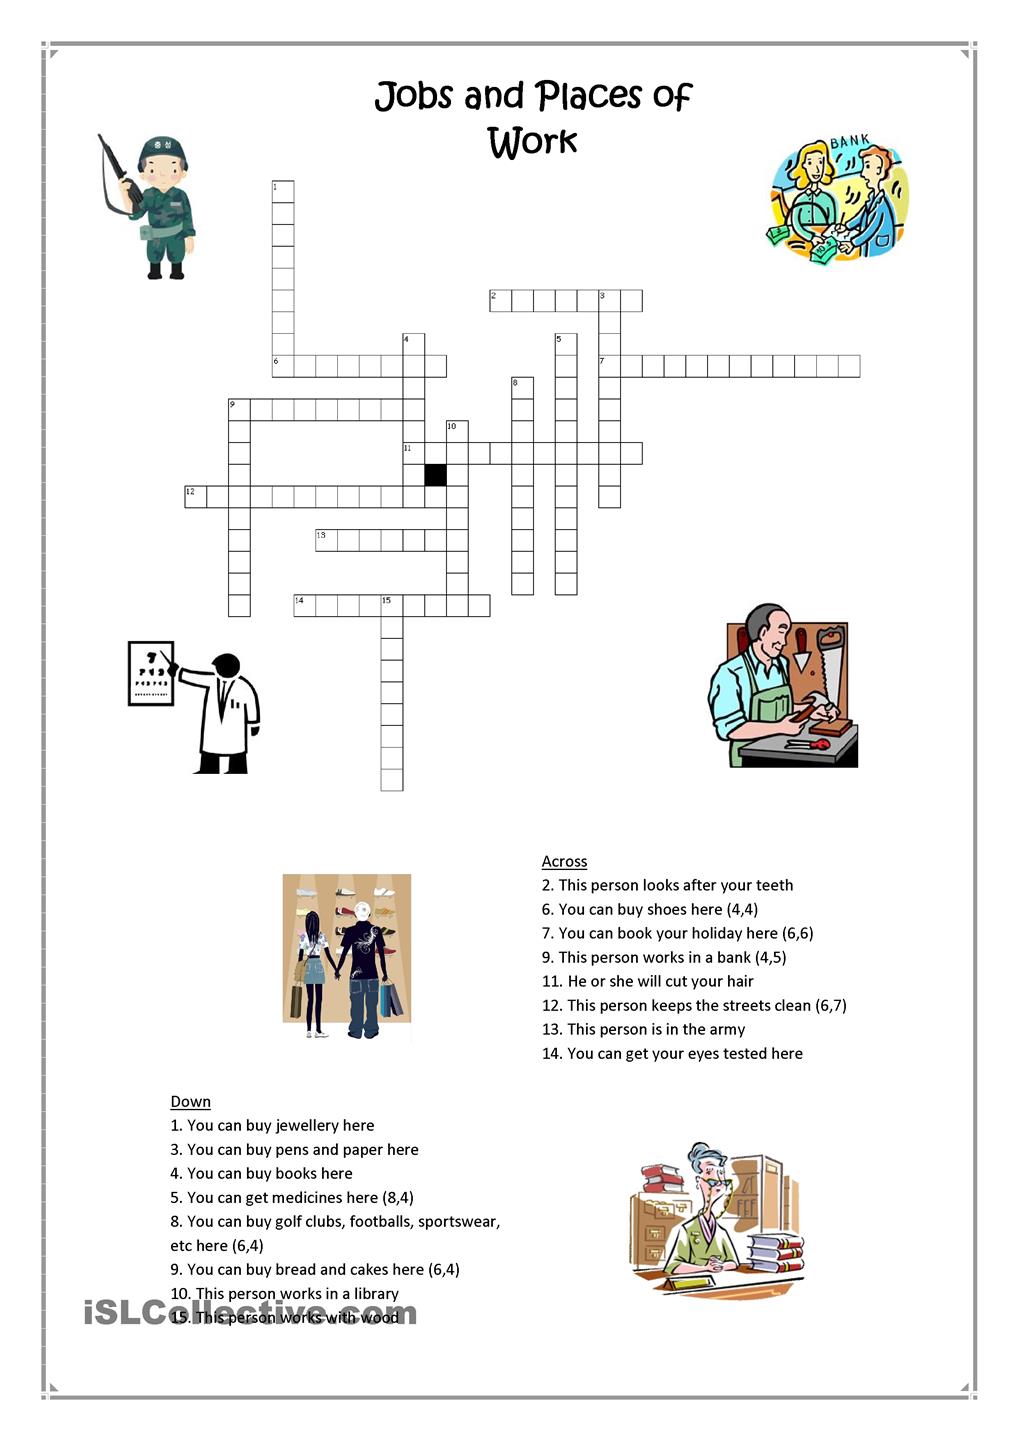 Work crossword. Кроссворд на английском. Places in Town crossword. Jobs and places. Places in Town кроссворд.